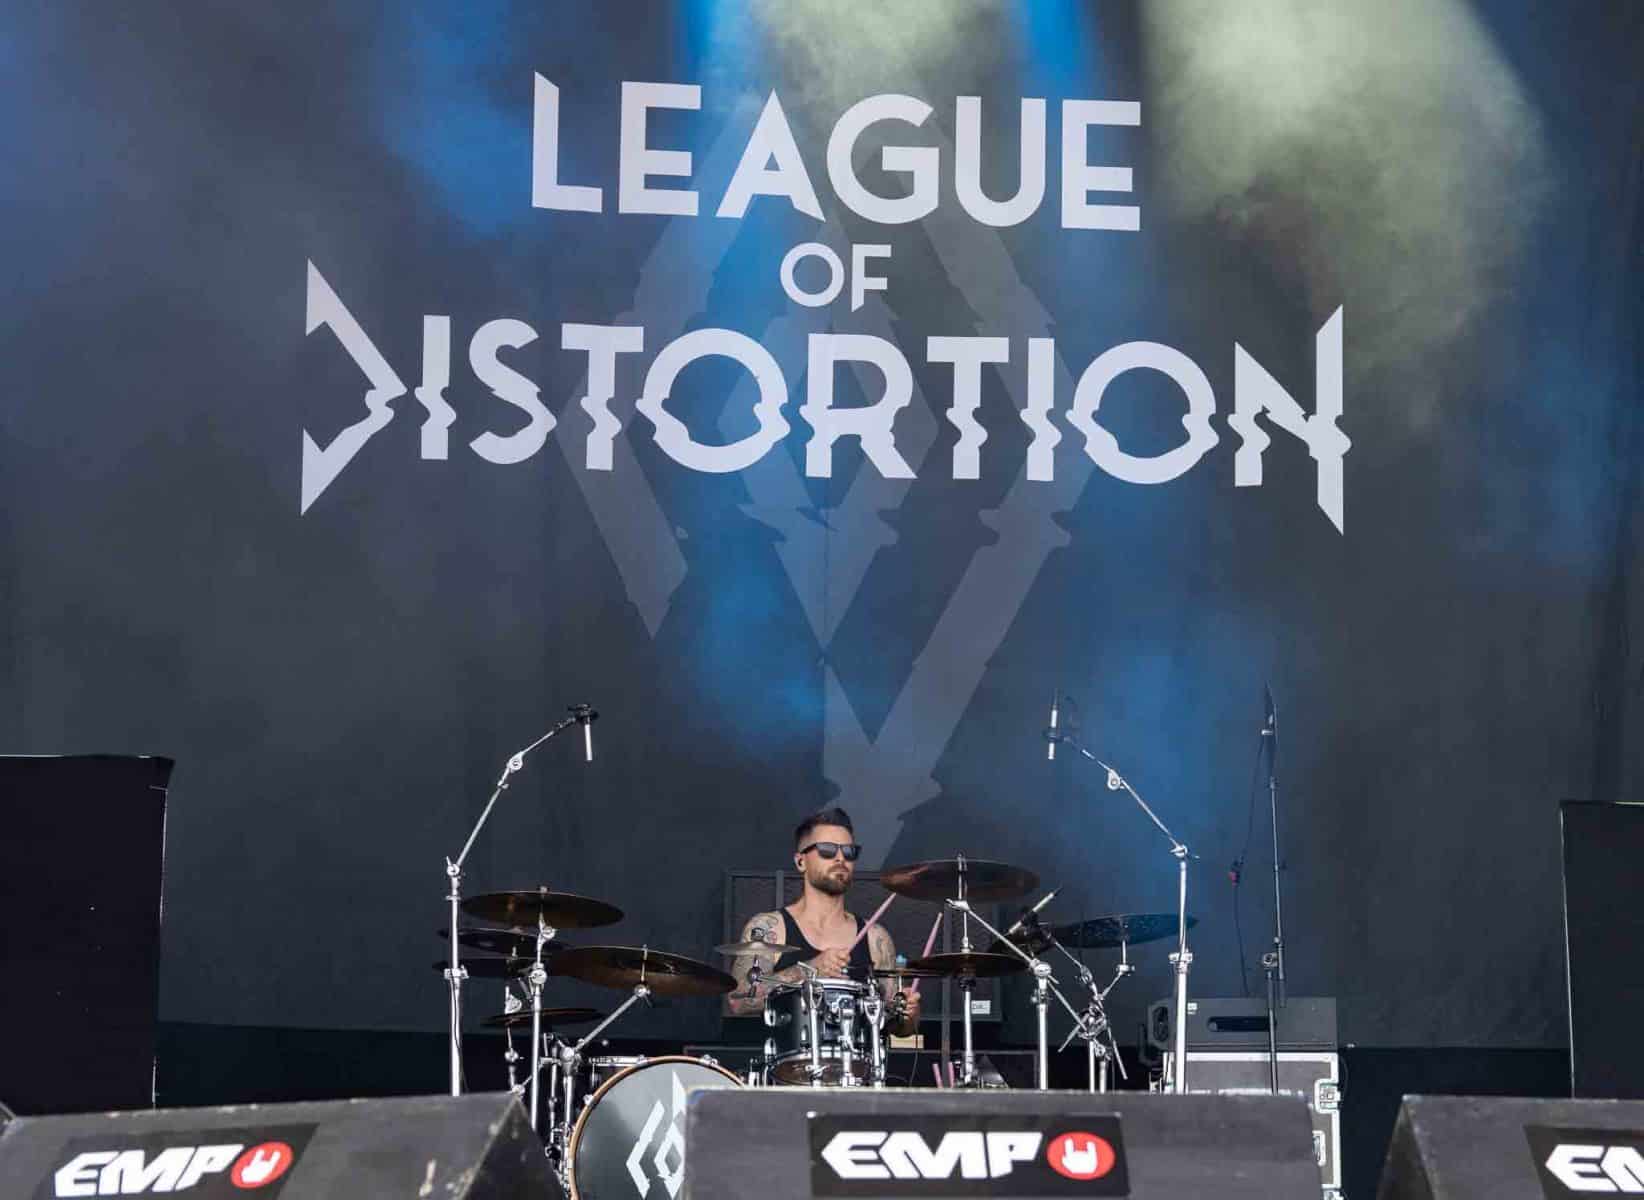 League-Of-Distortion-7